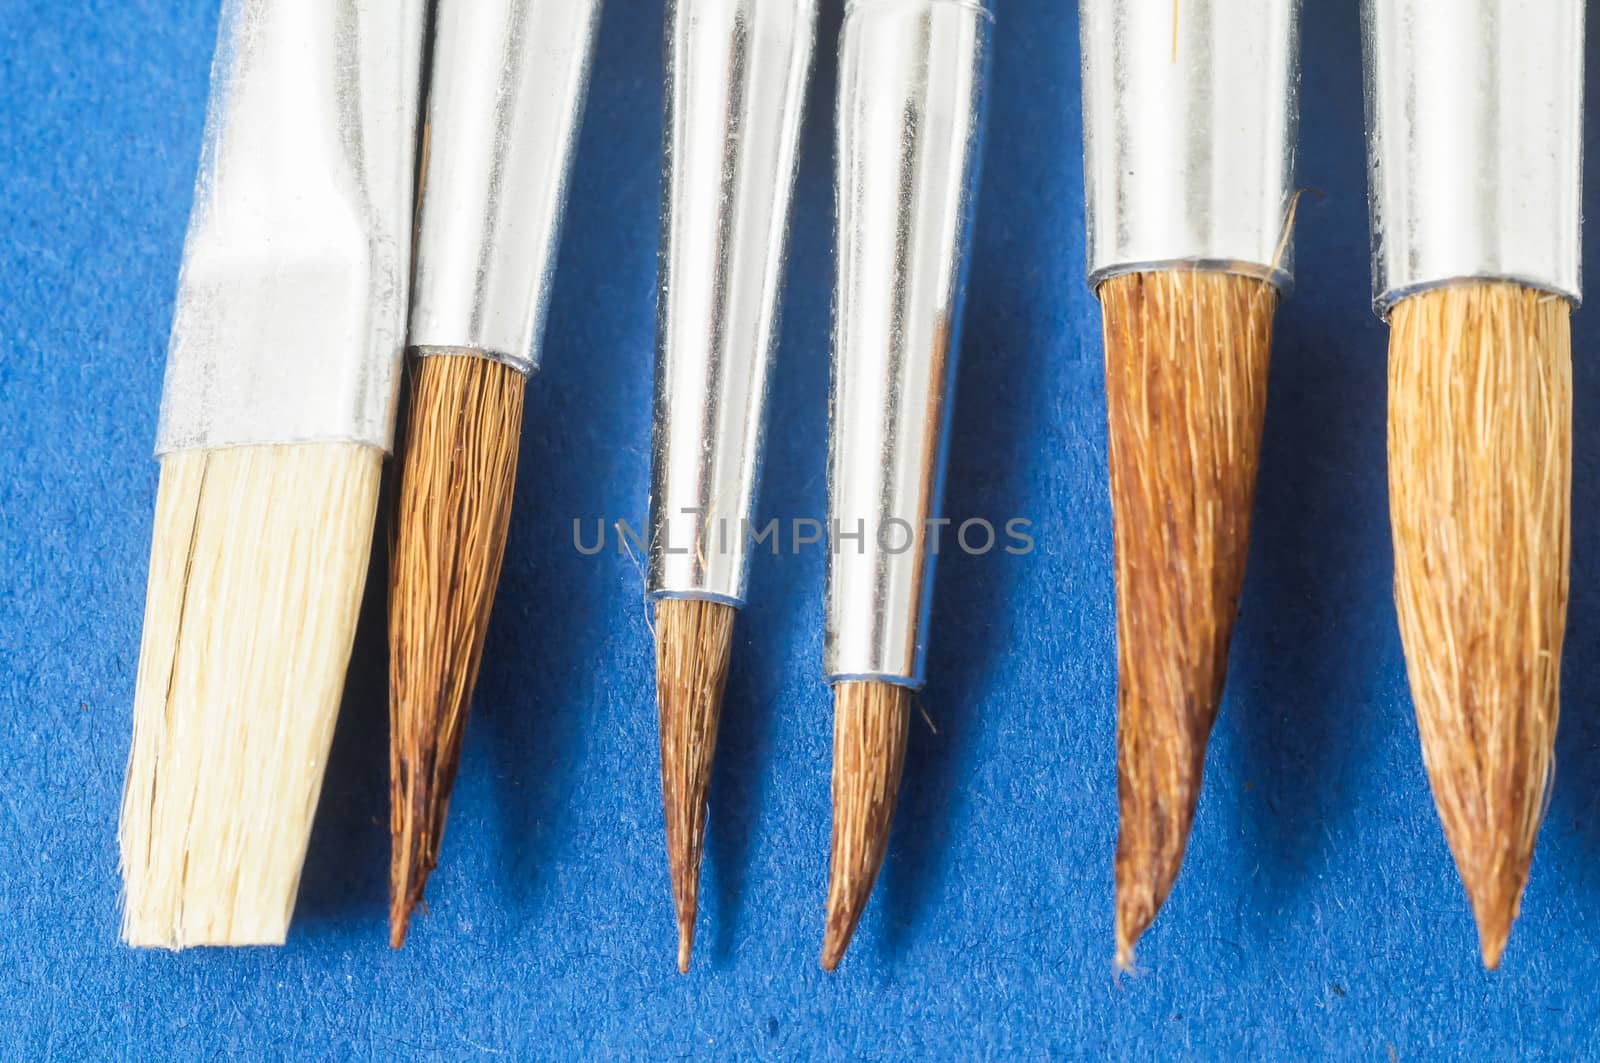 New Wooden Different Paintbrush Set Texture over a Colored Background